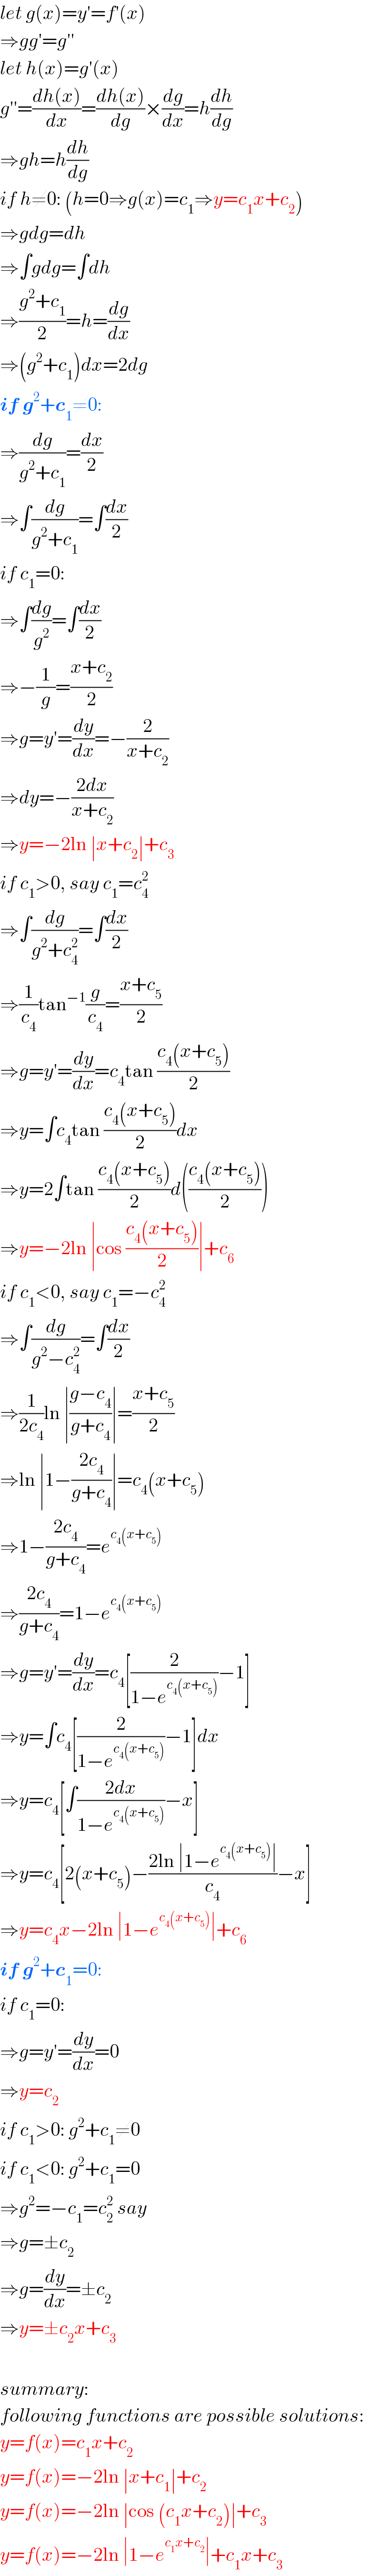 let g(x)=y′=f′(x)  ⇒gg′=g′′  let h(x)=g′(x)  g′′=((dh(x))/dx)=((dh(x))/dg)×(dg/dx)=h(dh/dg)  ⇒gh=h(dh/dg)  if h≠0: (h=0⇒g(x)=c_1 ⇒y=c_1 x+c_2 )  ⇒gdg=dh  ⇒∫gdg=∫dh  ⇒((g^2 +c_1 )/2)=h=(dg/dx)  ⇒(g^2 +c_1 )dx=2dg  if g^2 +c_1 ≠0:  ⇒(dg/(g^2 +c_1 ))=(dx/2)  ⇒∫(dg/(g^2 +c_1 ))=∫(dx/2)  if c_1 =0:  ⇒∫(dg/g^2 )=∫(dx/2)  ⇒−(1/g)=((x+c_2 )/2)  ⇒g=y′=(dy/dx)=−(2/(x+c_2 ))  ⇒dy=−((2dx)/(x+c_2 ))  ⇒y=−2ln ∣x+c_2 ∣+c_3   if c_1 >0, say c_1 =c_4 ^2   ⇒∫(dg/(g^2 +c_4 ^2 ))=∫(dx/2)  ⇒(1/c_4 )tan^(−1) (g/c_4 )=((x+c_5 )/2)  ⇒g=y′=(dy/dx)=c_4 tan ((c_4 (x+c_5 ))/2)  ⇒y=∫c_4 tan ((c_4 (x+c_5 ))/2)dx  ⇒y=2∫tan ((c_4 (x+c_5 ))/2)d(((c_4 (x+c_5 ))/2))  ⇒y=−2ln ∣cos ((c_4 (x+c_5 ))/2)∣+c_6   if c_1 <0, say c_1 =−c_4 ^2   ⇒∫(dg/(g^2 −c_4 ^2 ))=∫(dx/2)  ⇒(1/(2c_4 ))ln ∣((g−c_4 )/(g+c_4 ))∣=((x+c_5 )/2)  ⇒ln ∣1−((2c_4 )/(g+c_4 ))∣=c_4 (x+c_5 )  ⇒1−((2c_4 )/(g+c_4 ))=e^(c_4 (x+c_5 ))   ⇒((2c_4 )/(g+c_4 ))=1−e^(c_4 (x+c_5 ))   ⇒g=y′=(dy/dx)=c_4 [(2/(1−e^(c_4 (x+c_5 )) ))−1]  ⇒y=∫c_4 [(2/(1−e^(c_4 (x+c_5 )) ))−1]dx  ⇒y=c_4 [∫((2dx)/(1−e^(c_4 (x+c_5 )) ))−x]  ⇒y=c_4 [2(x+c_5 )−((2ln ∣1−e^(c_4 (x+c_5 )) ∣)/c_4 )−x]  ⇒y=c_4 x−2ln ∣1−e^(c_4 (x+c_5 )) ∣+c_6   if g^2 +c_1 =0:  if c_1 =0:  ⇒g=y′=(dy/dx)=0  ⇒y=c_2   if c_1 >0: g^2 +c_1 ≠0  if c_1 <0: g^2 +c_1 =0  ⇒g^2 =−c_1 =c_2 ^2  say  ⇒g=±c_2   ⇒g=(dy/dx)=±c_2   ⇒y=±c_2 x+c_3     summary:  following functions are possible solutions:  y=f(x)=c_1 x+c_2   y=f(x)=−2ln ∣x+c_1 ∣+c_2   y=f(x)=−2ln ∣cos (c_1 x+c_2 )∣+c_3   y=f(x)=−2ln ∣1−e^(c_1 x+c_2 ) ∣+c_1 x+c_3   